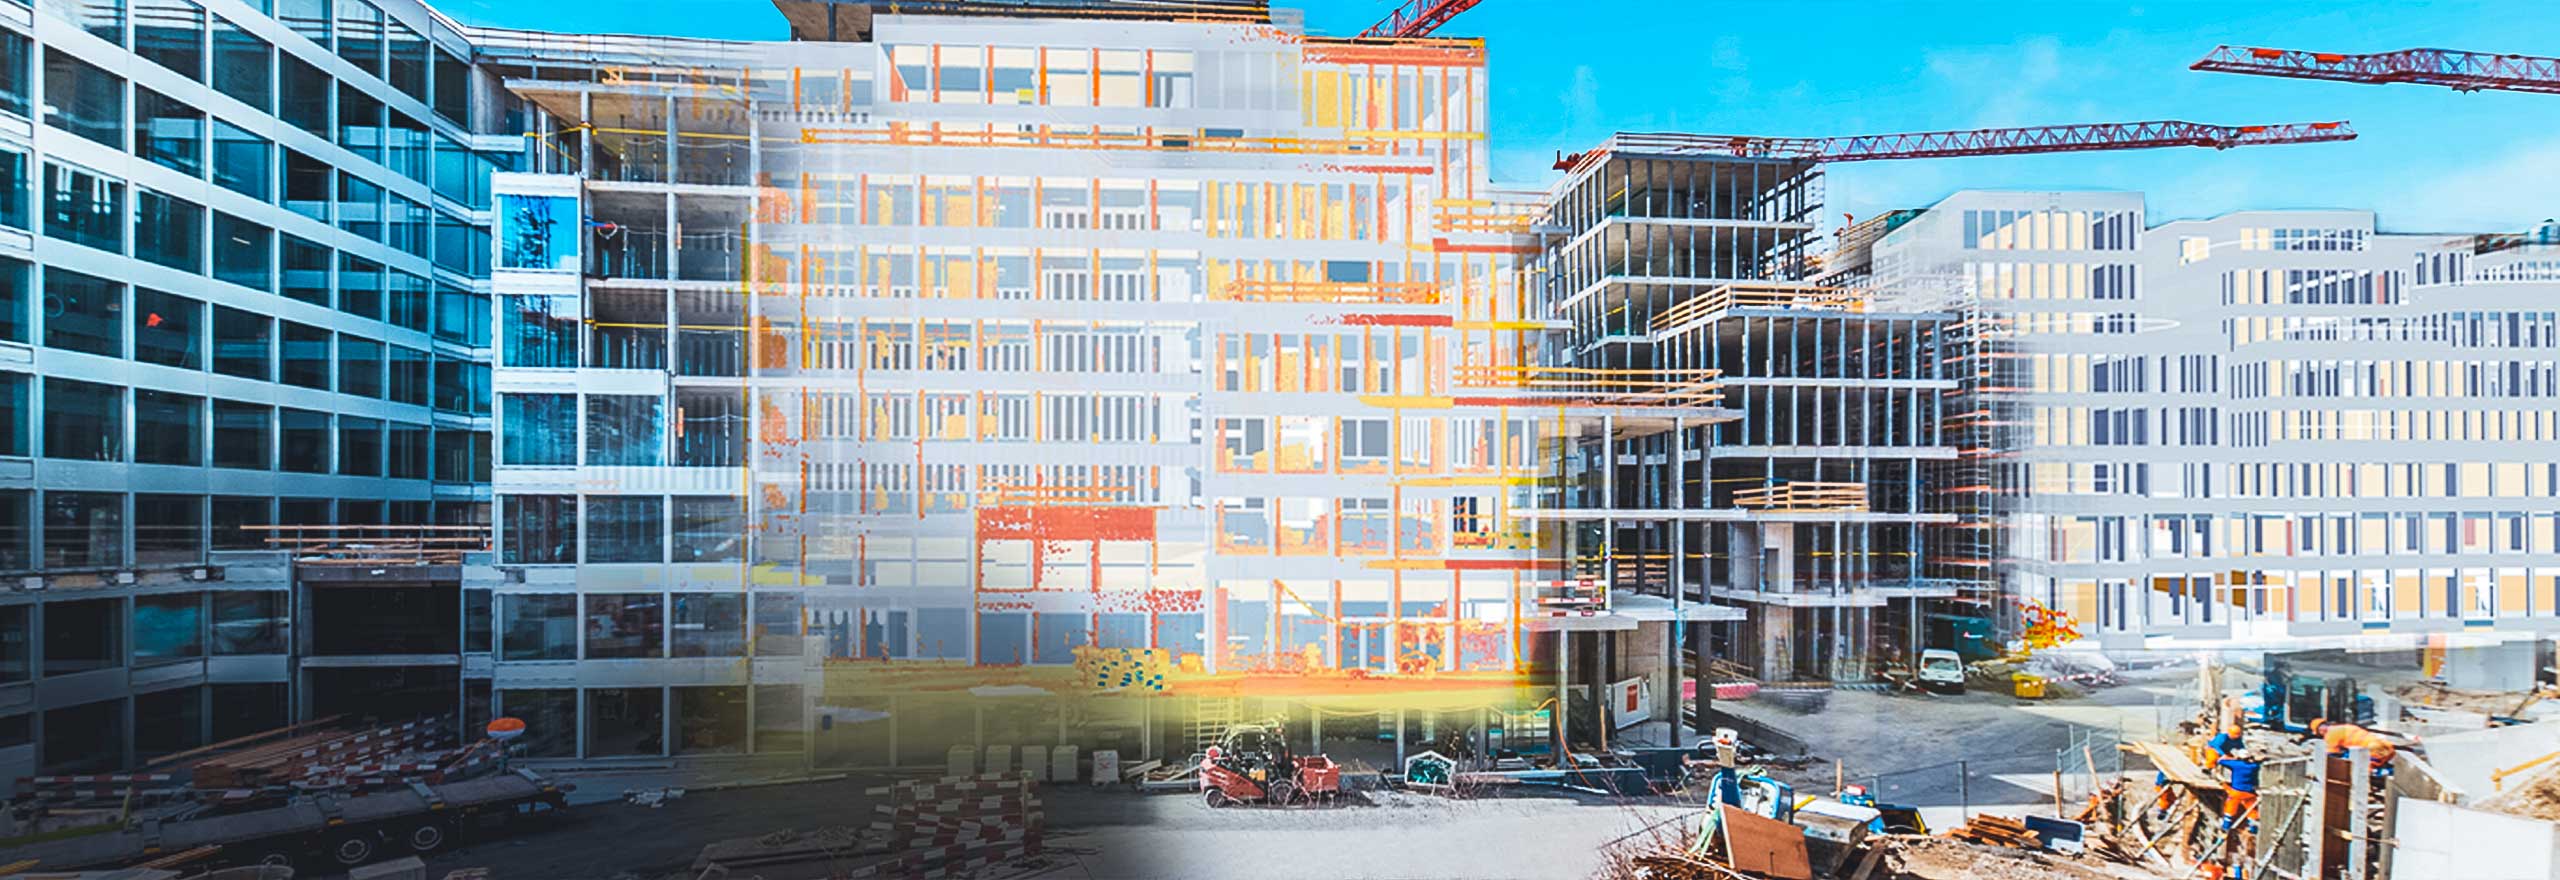 high-rise building construction site with merged photography and 3D modelling  